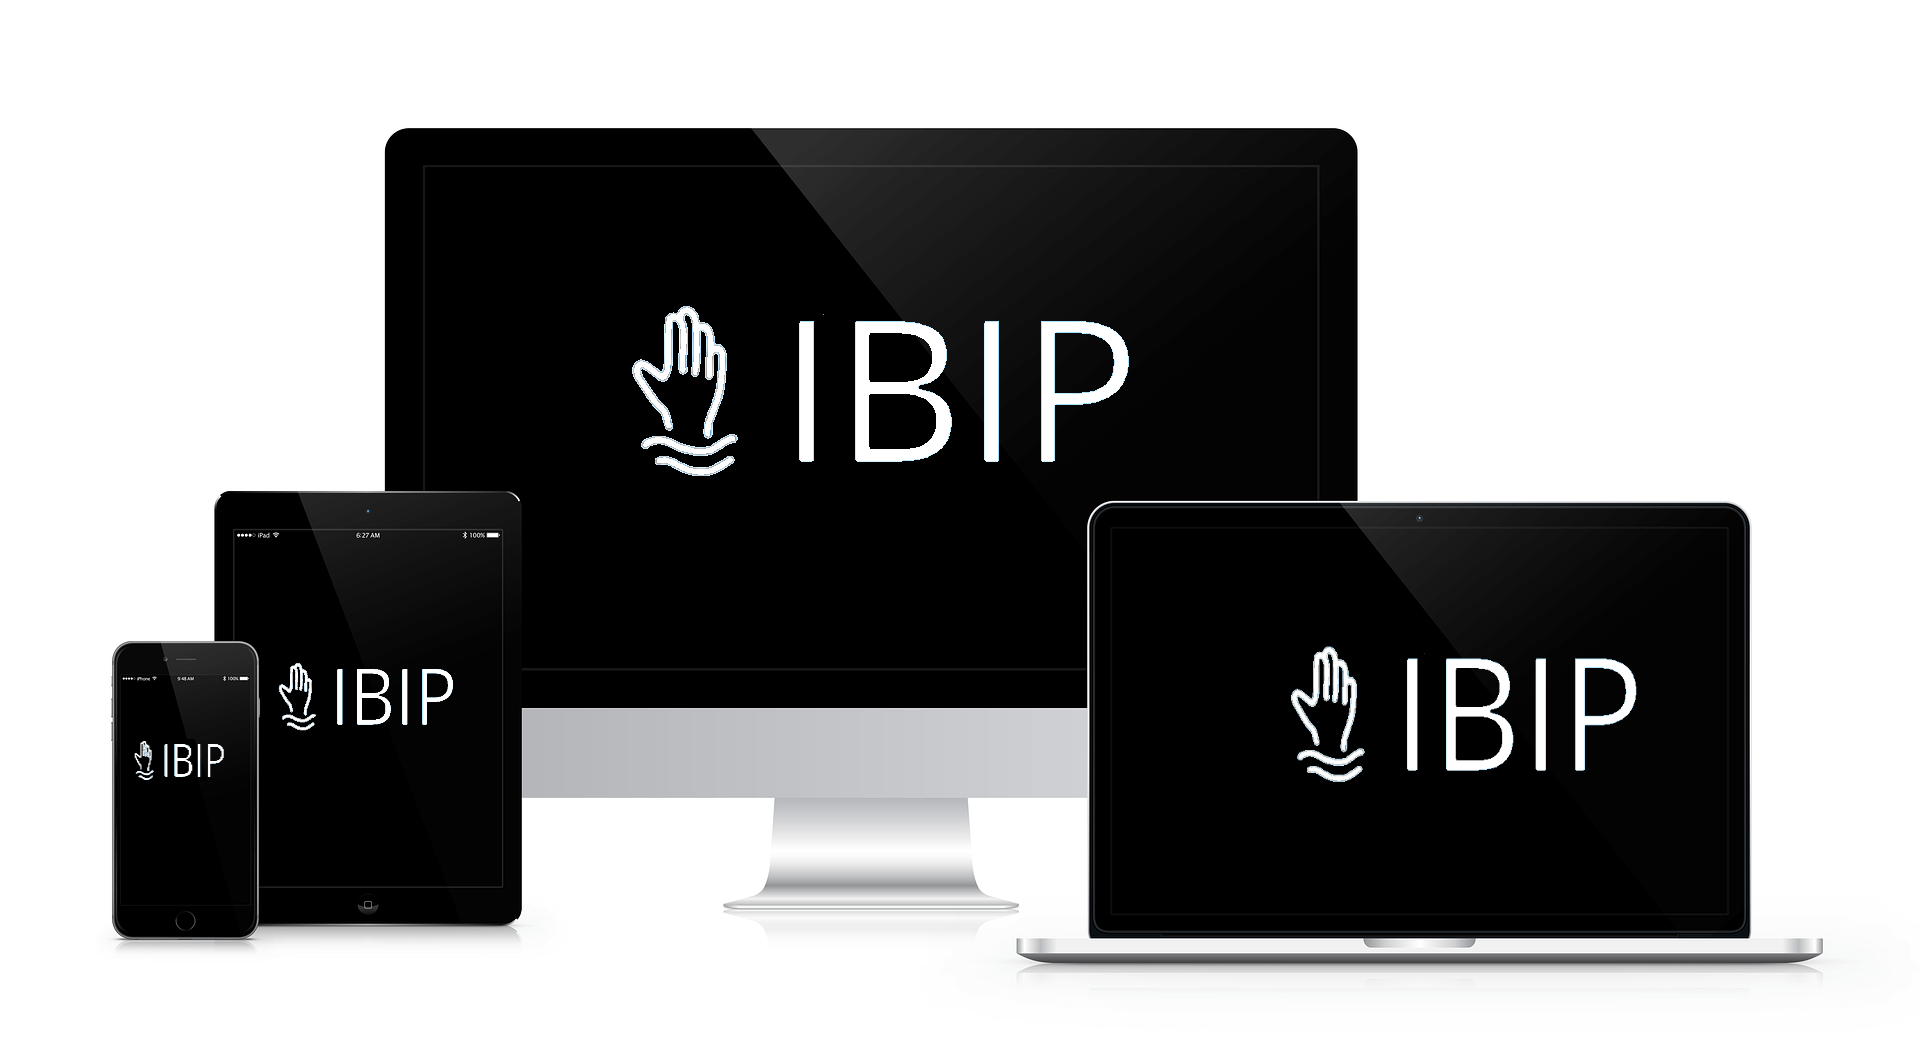 IBIP installed devices